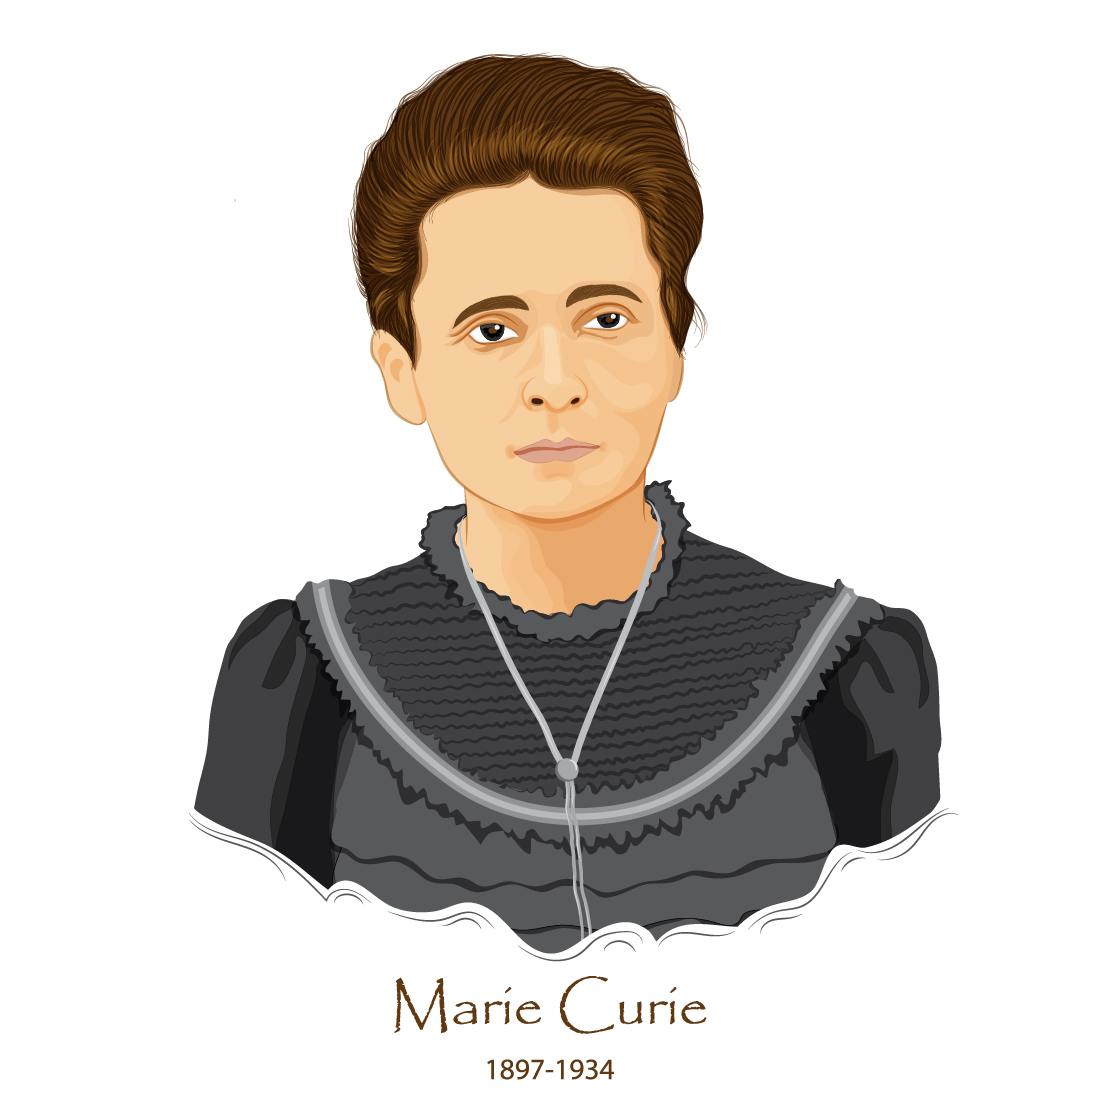 Marie Curie famous scientist in chemistry and physics, pioneer in research of radioactivity, Nobel Prize winner preview image.